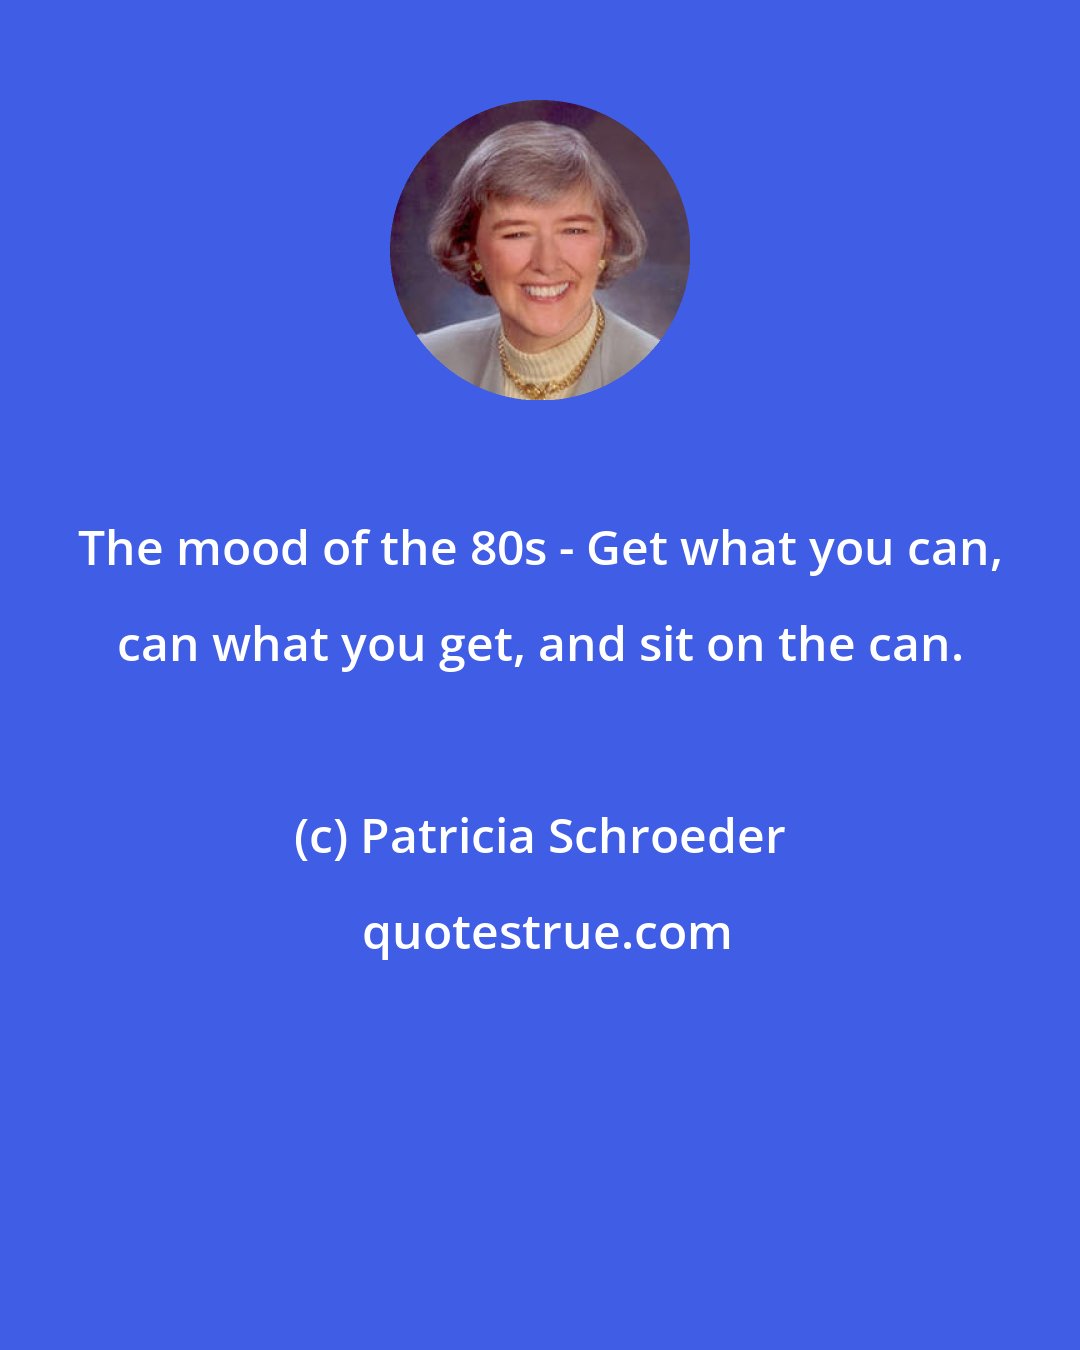 Patricia Schroeder: The mood of the 80s - Get what you can, can what you get, and sit on the can.